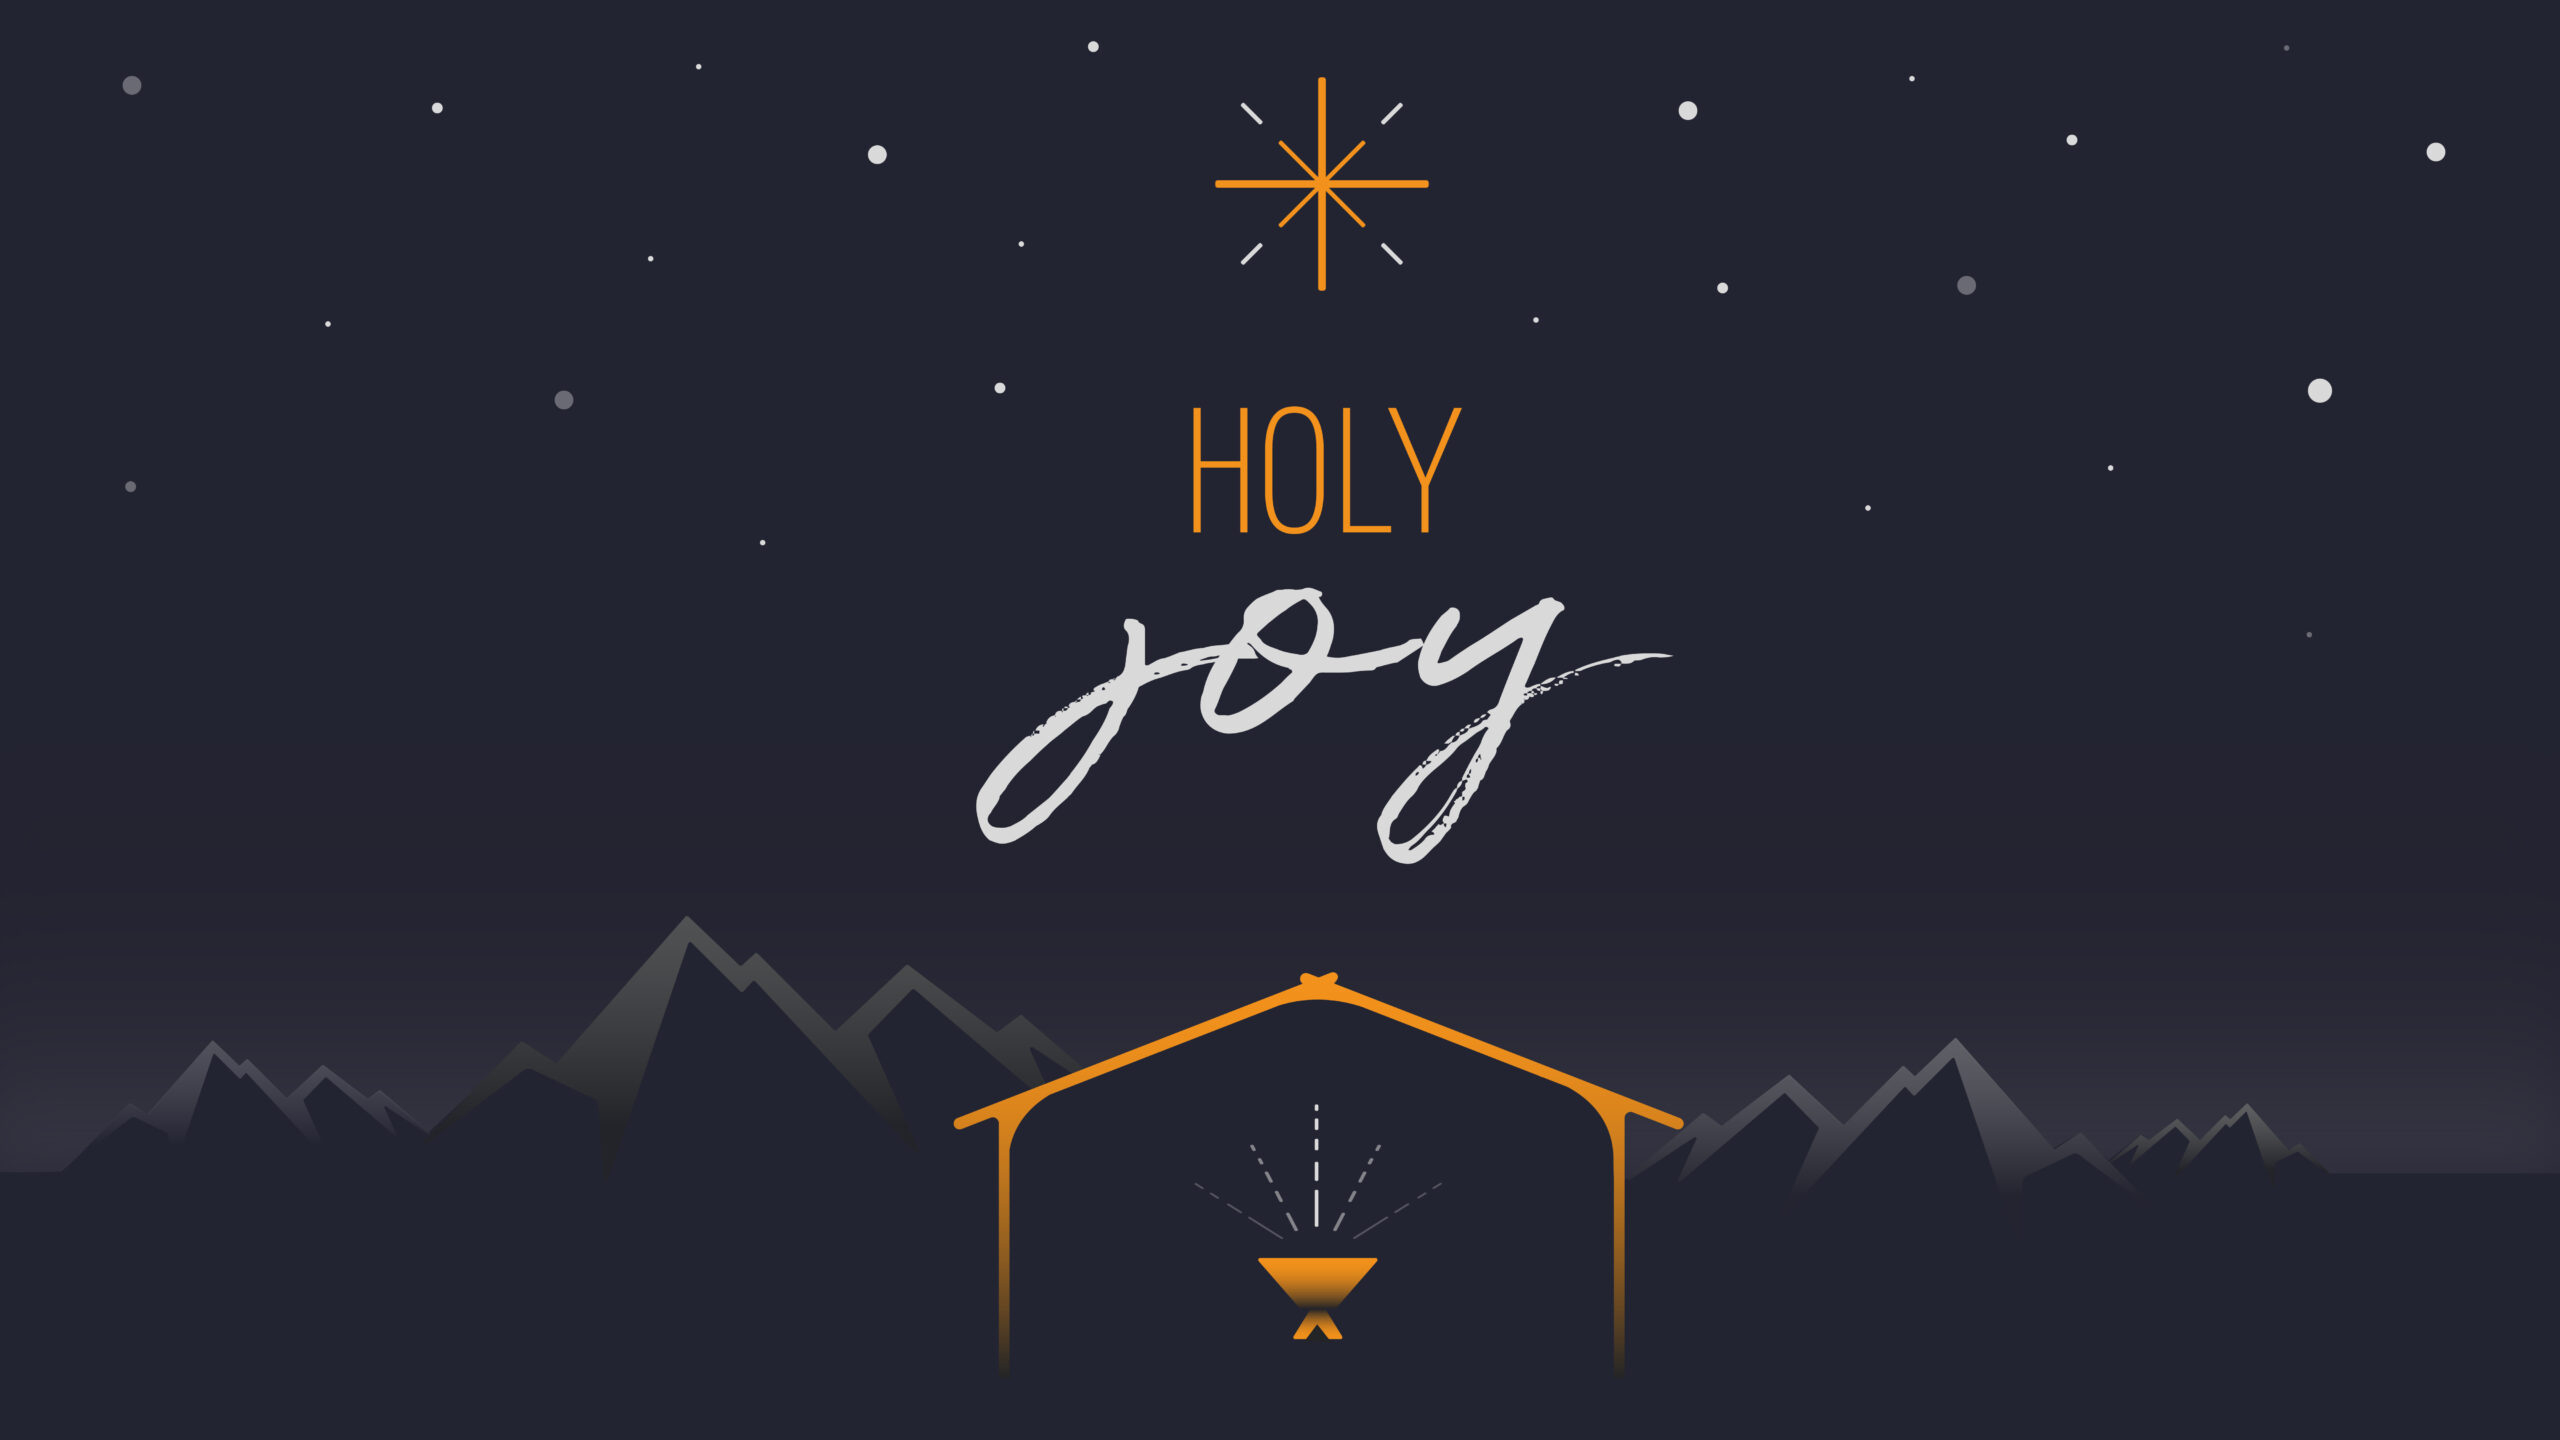 Part 3 – The Shepherds: Joy That Comes from Inclusion